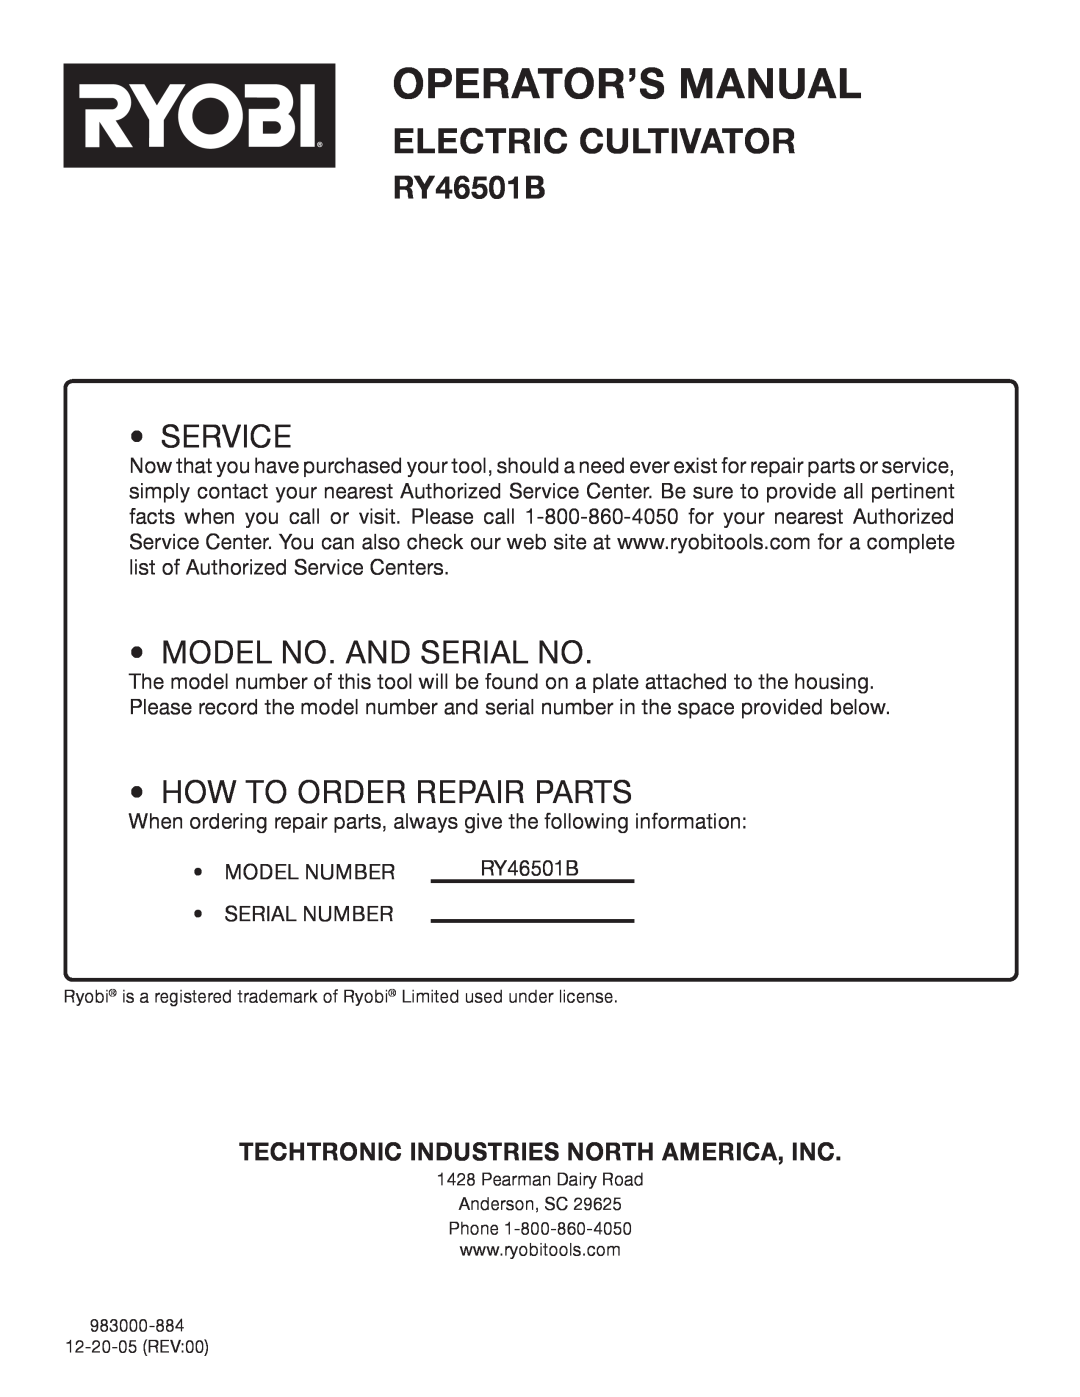 Ryobi Outdoor RY46501B Operator’S Manual, Electric Cultivator, Service, Model No. And Serial No, How To Order Repair Parts 